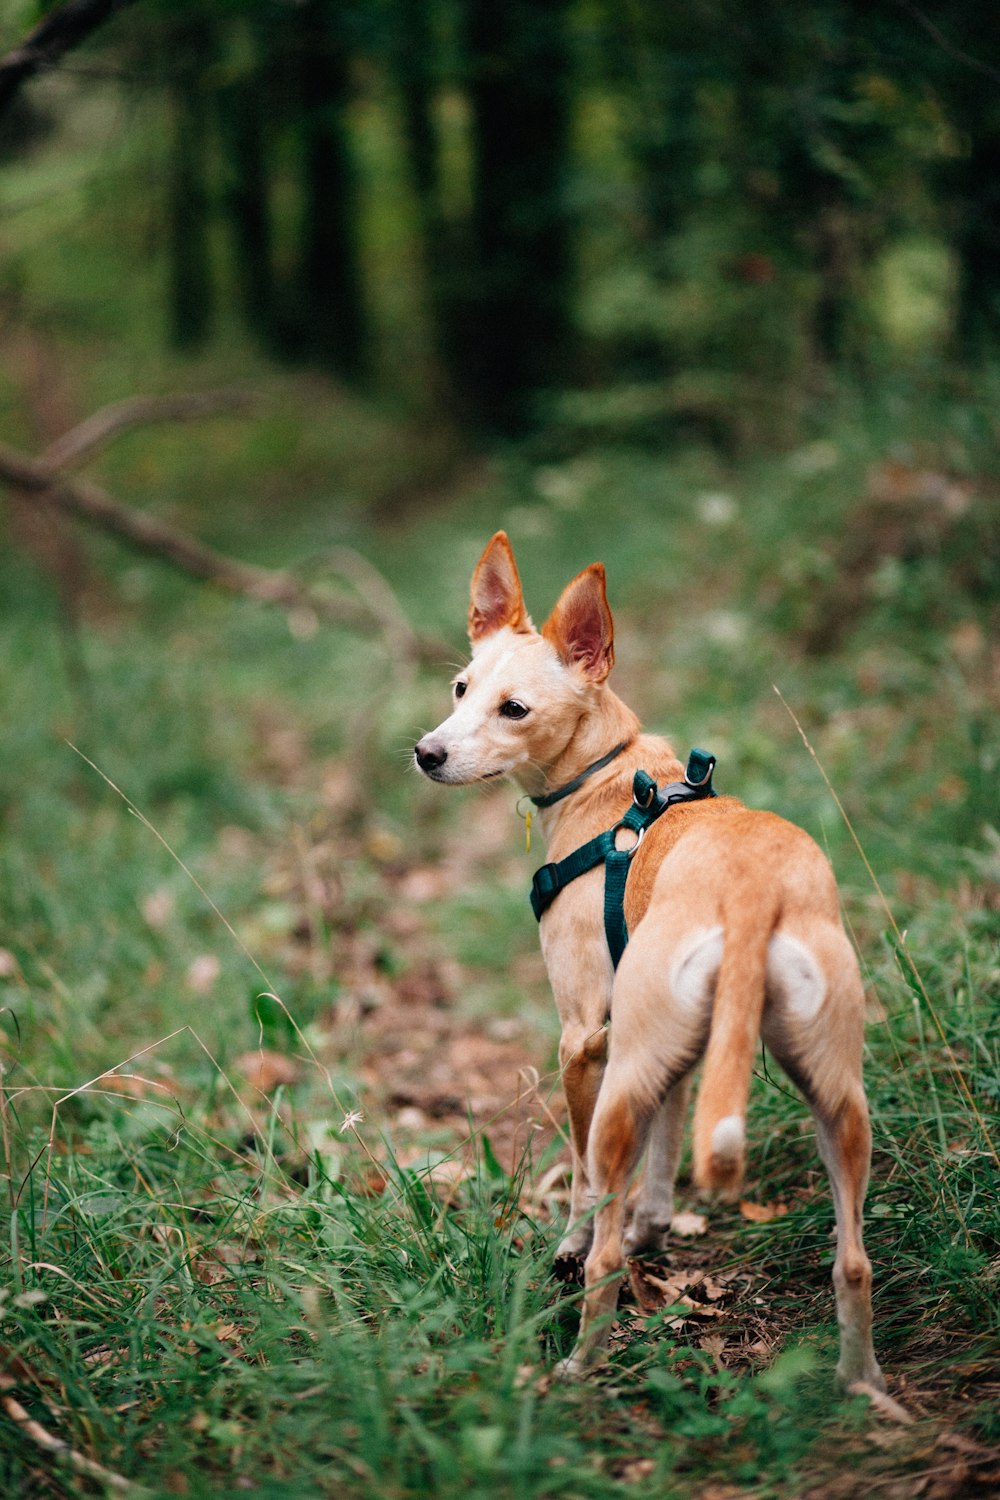 a dog with a harness in a grassy area photo – Free Spain Image on Unsplash